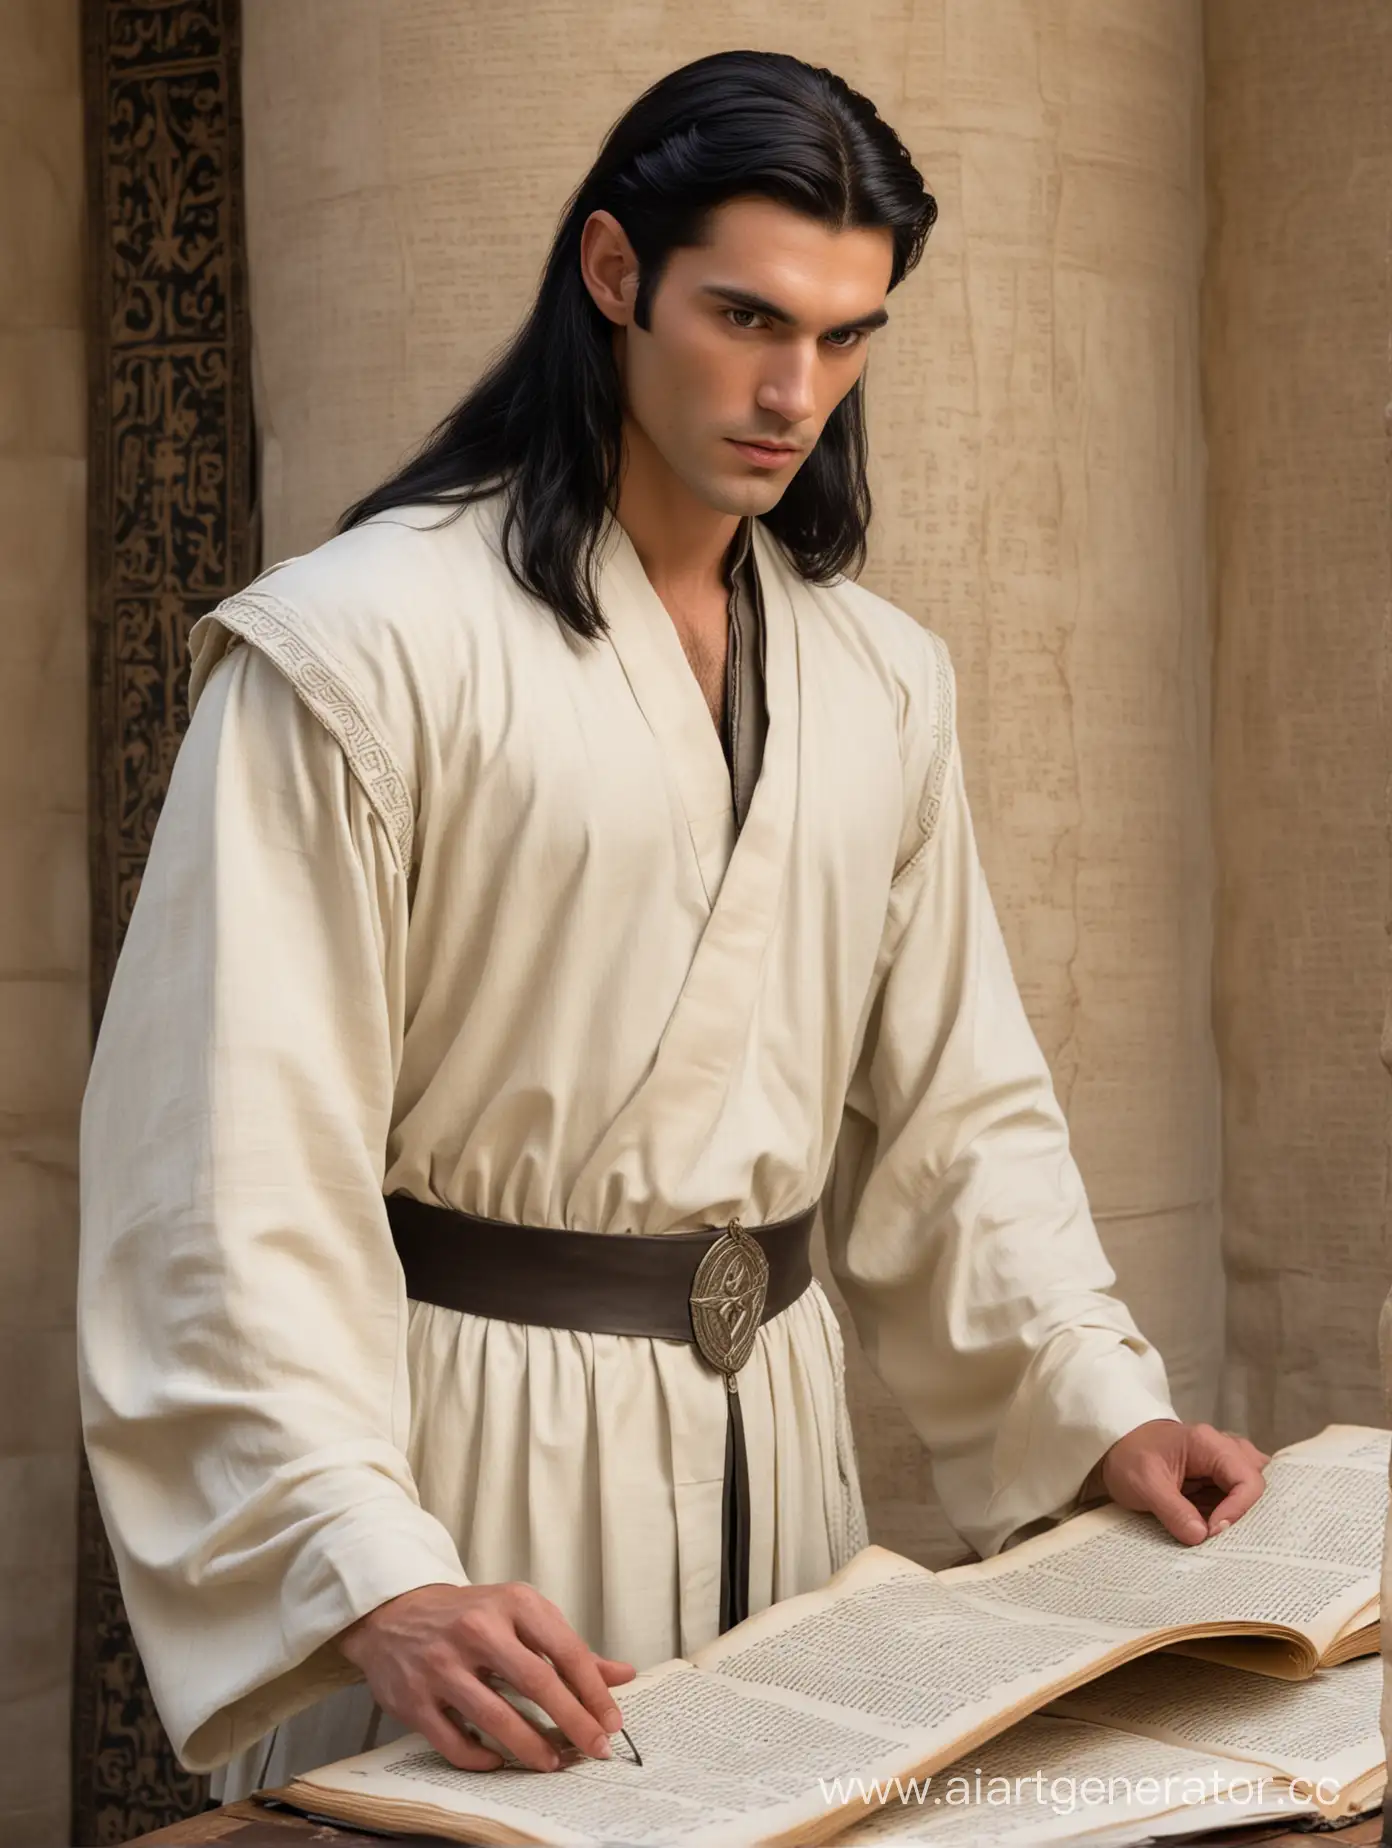 Vulcan male, long straight black hair, pointy ears, light colored loose clothing, looking into a manuscript